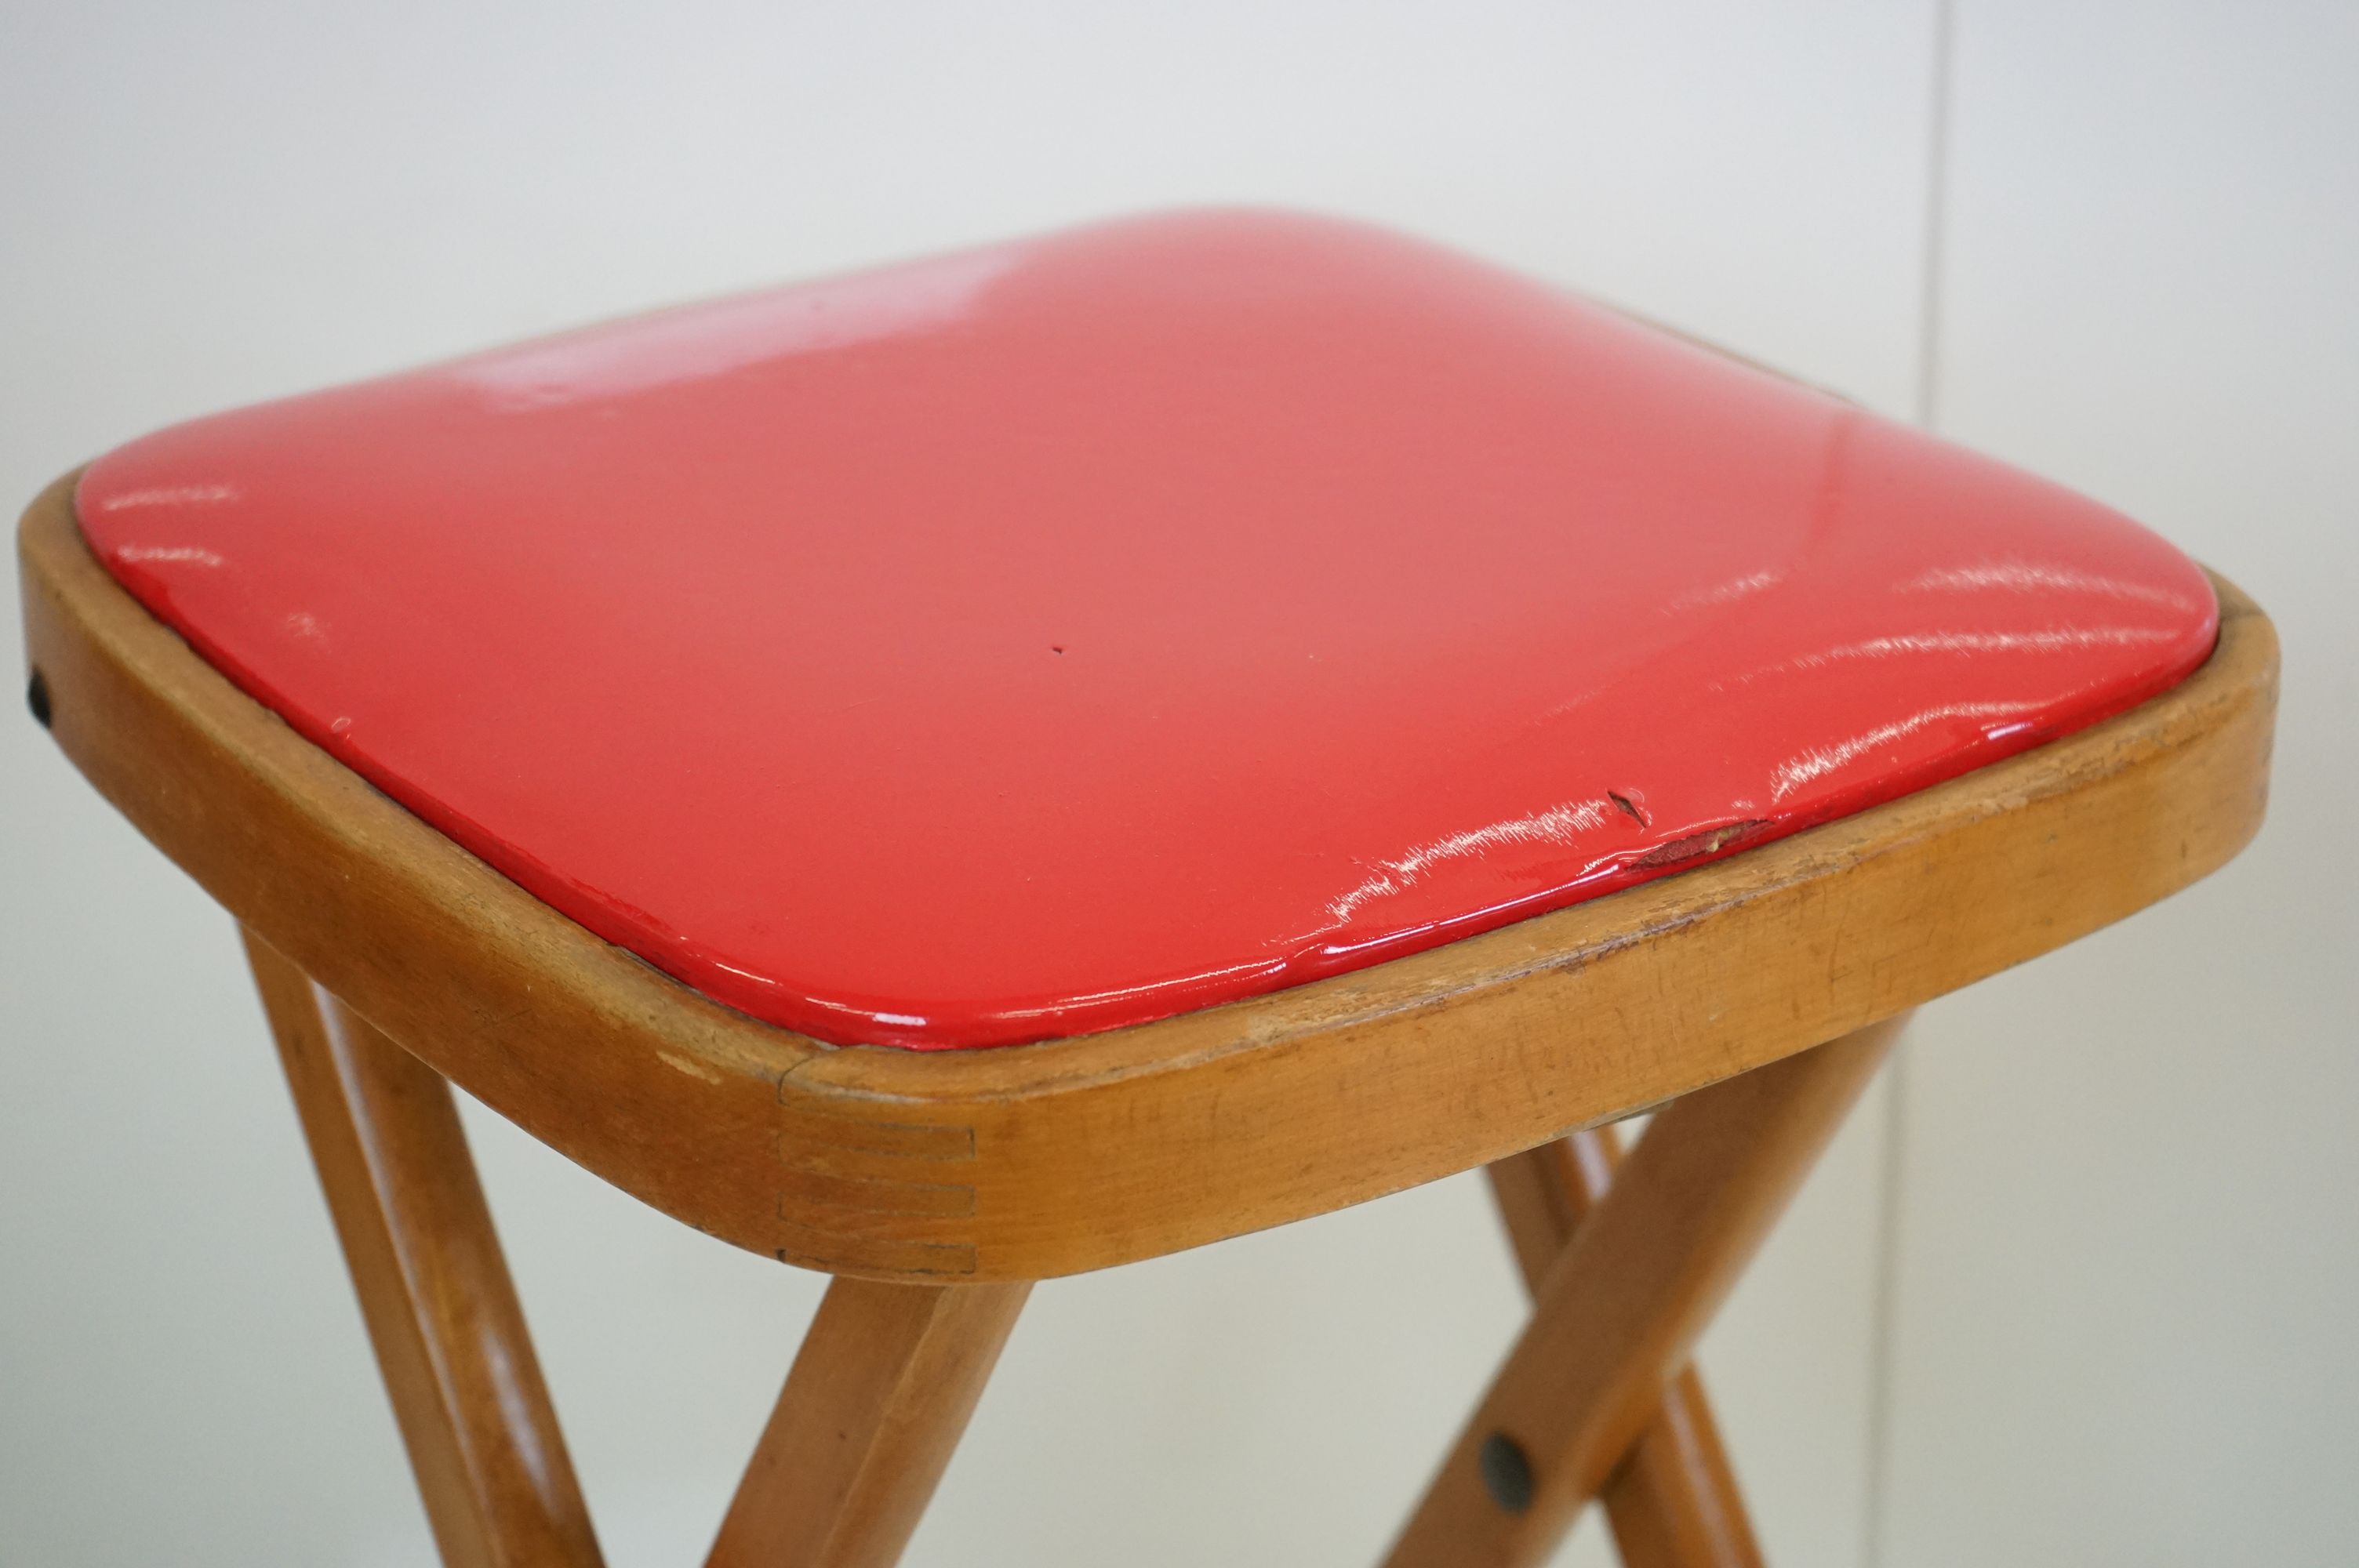 Pair of 1960s folding kitchen stools, 50cm high - Image 11 of 11